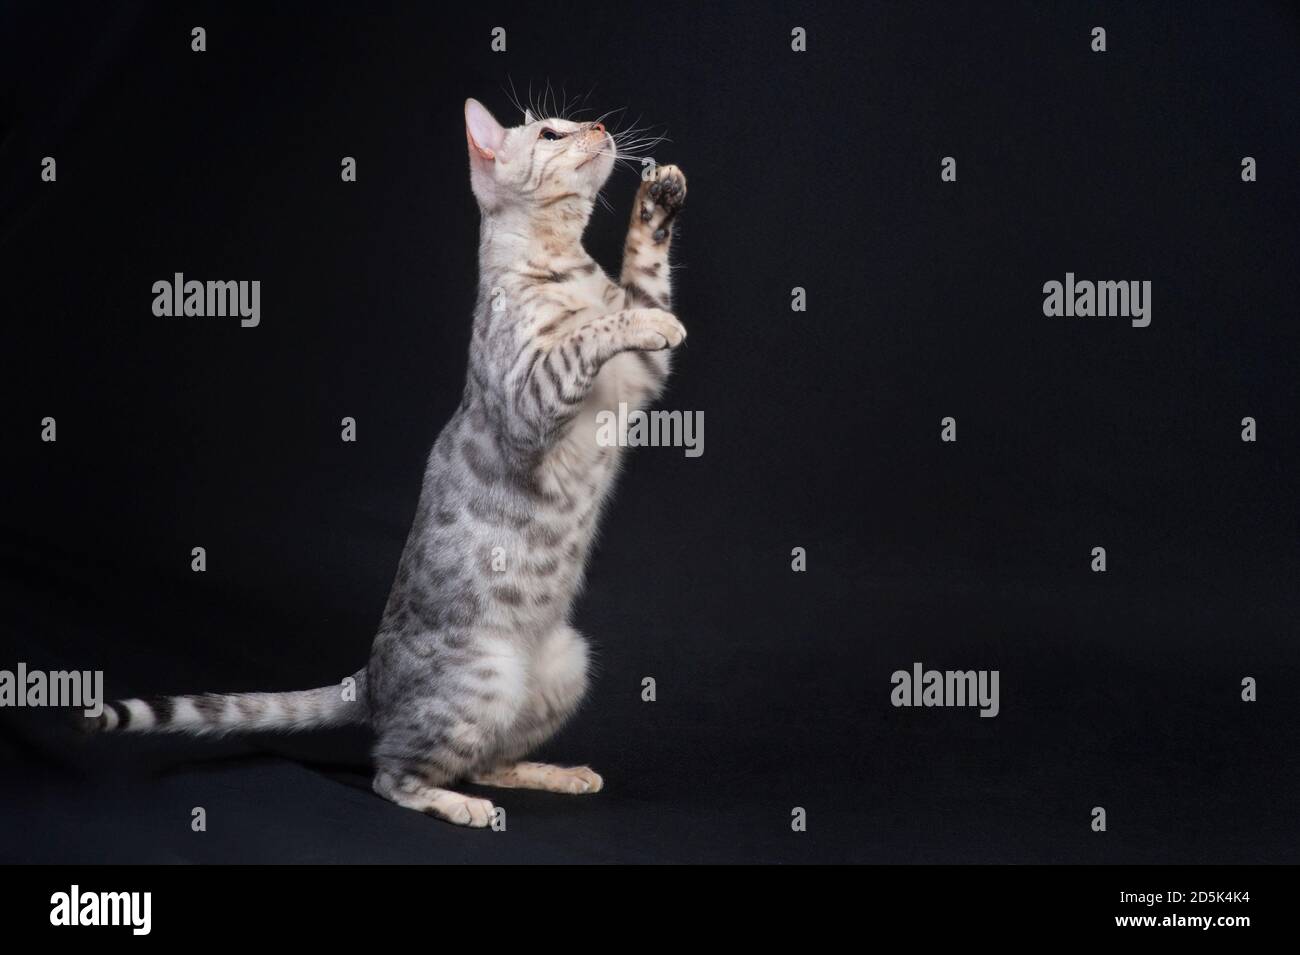 Silver bengal cat standing up on her hind legs. Stock Photo